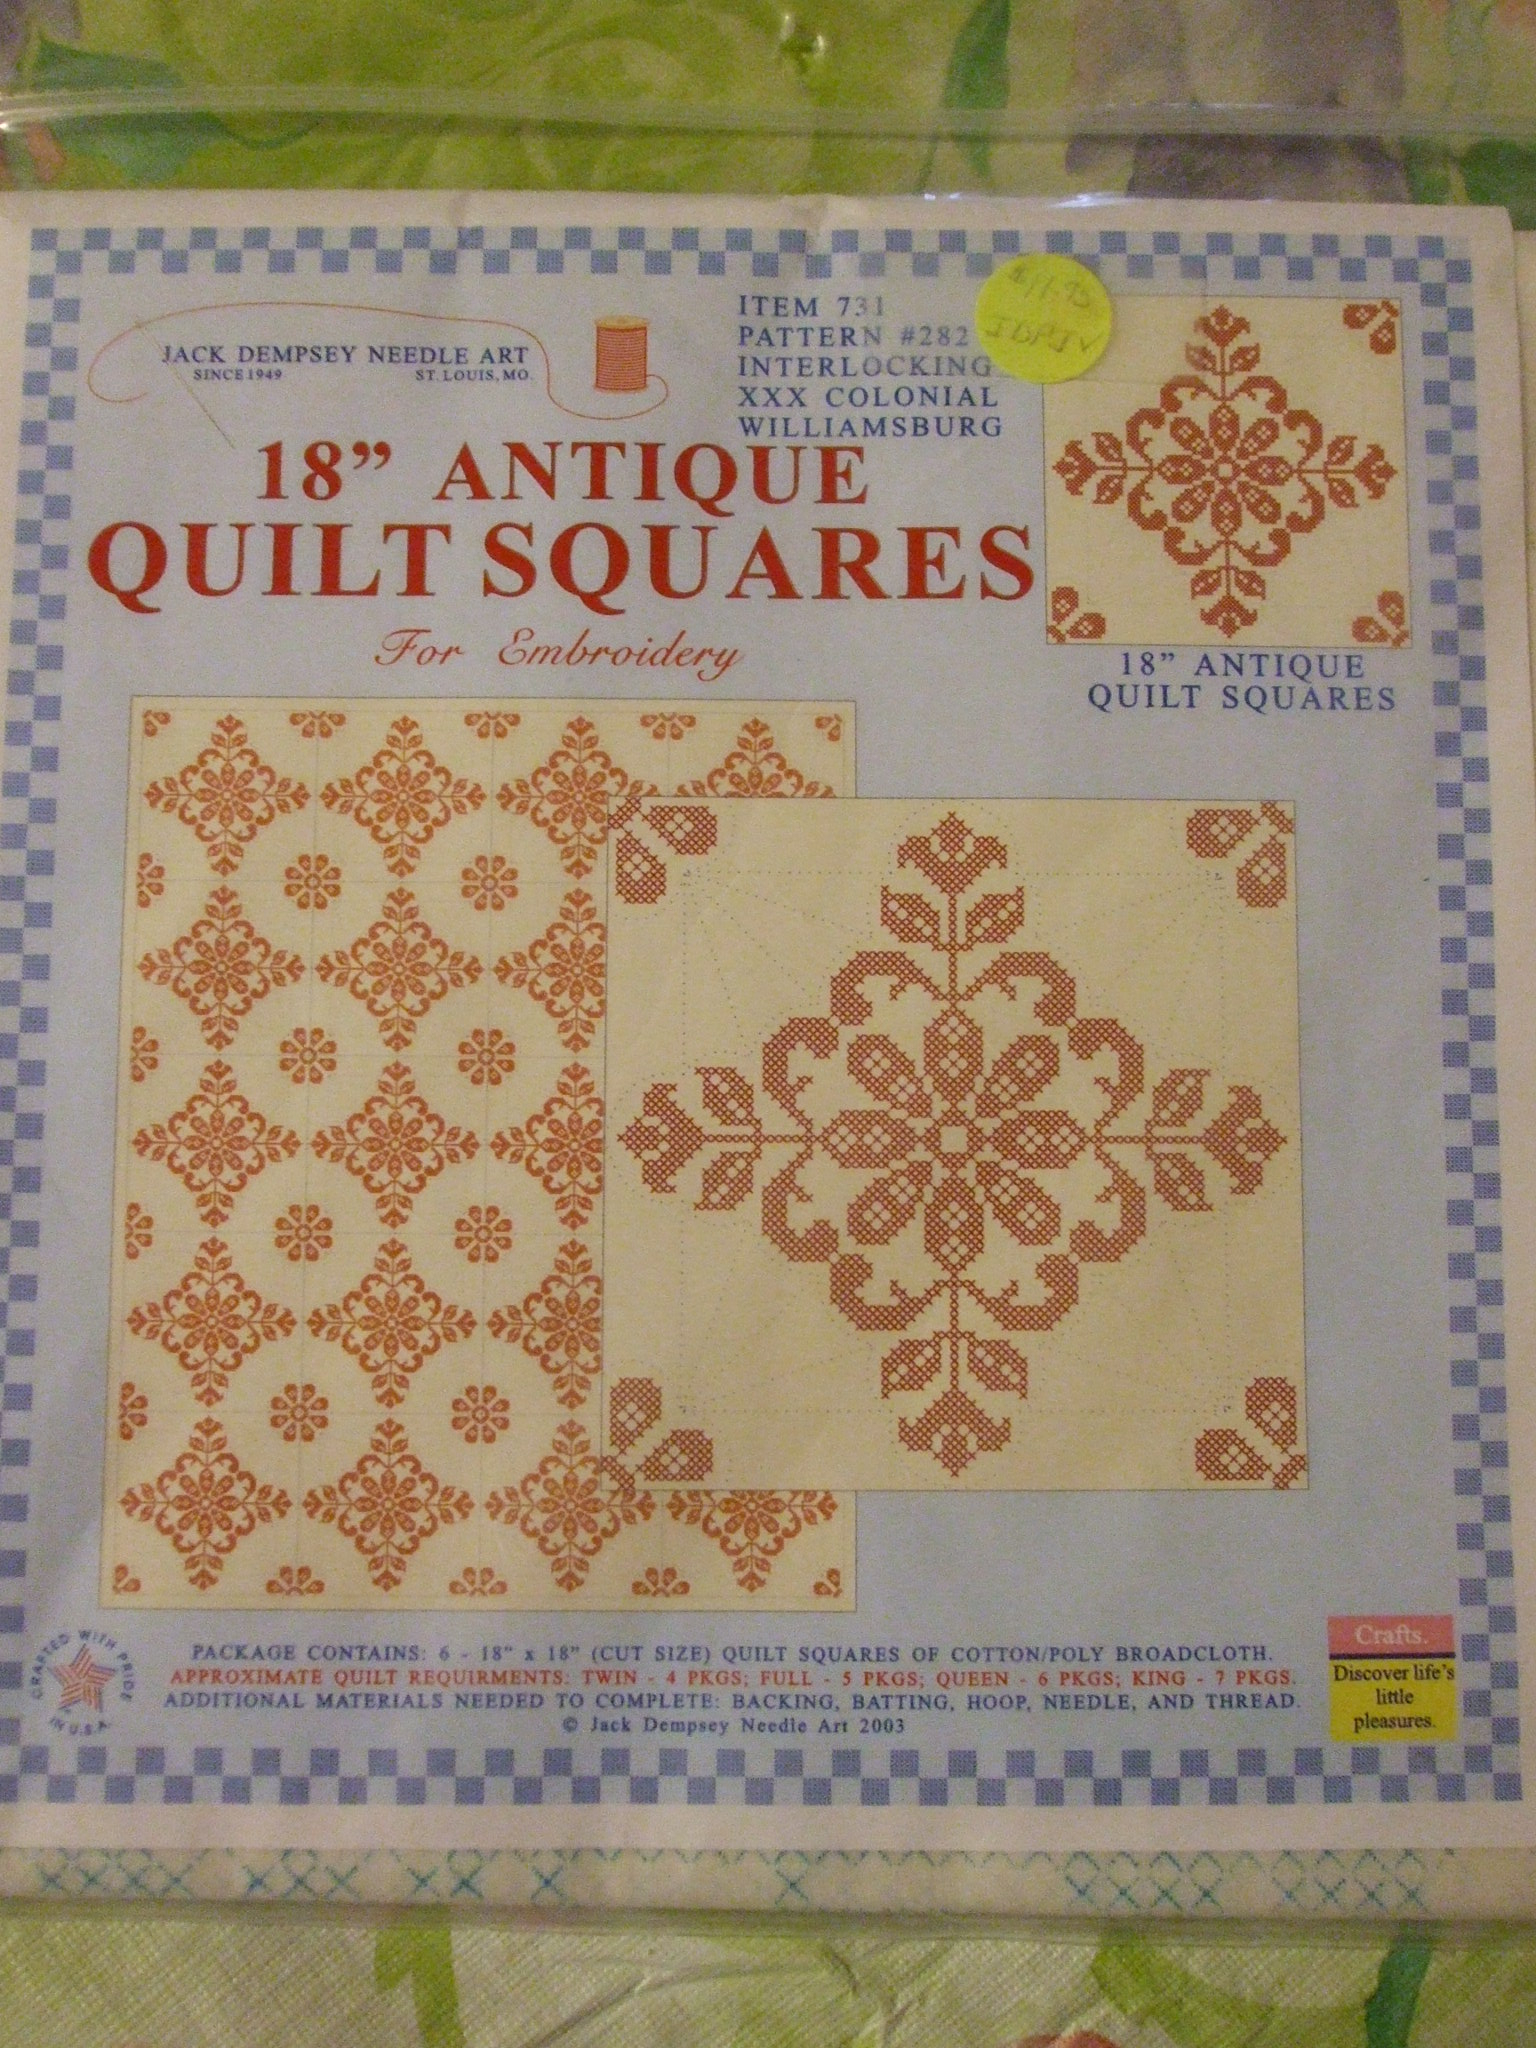 Colonial Embroidery Patterns Quilt Blocks Preprint Embroidery Patterns 18in X 6 Pce Cotton Poly Broadcloth Jack Dempsey